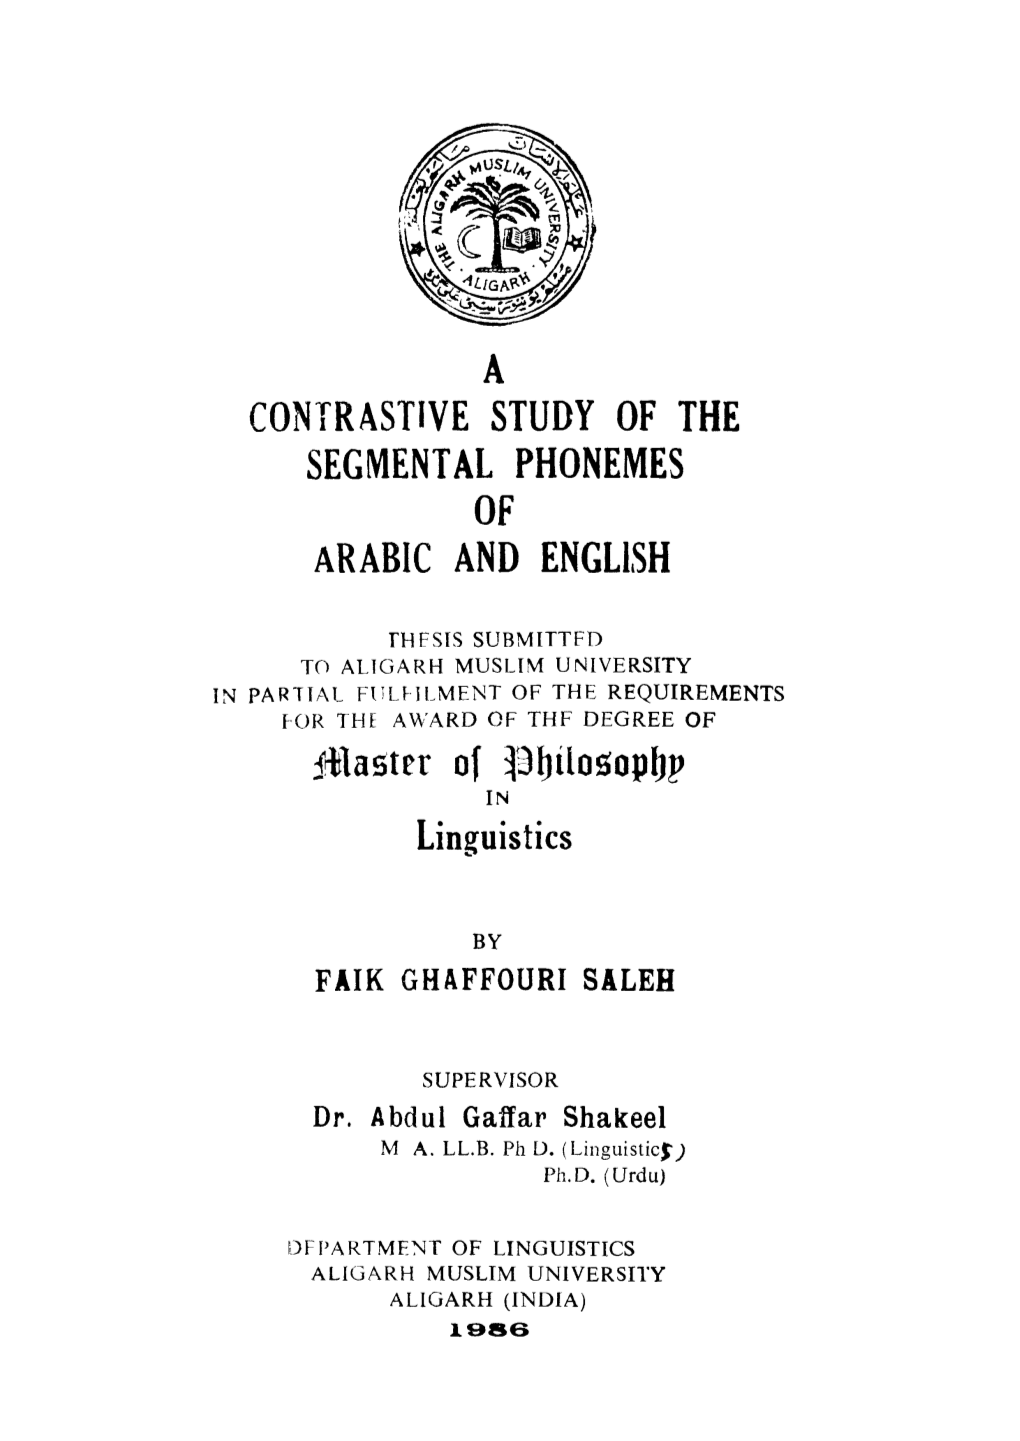 A Contrastive Study of the Segmental Phonemes of Arabic and English